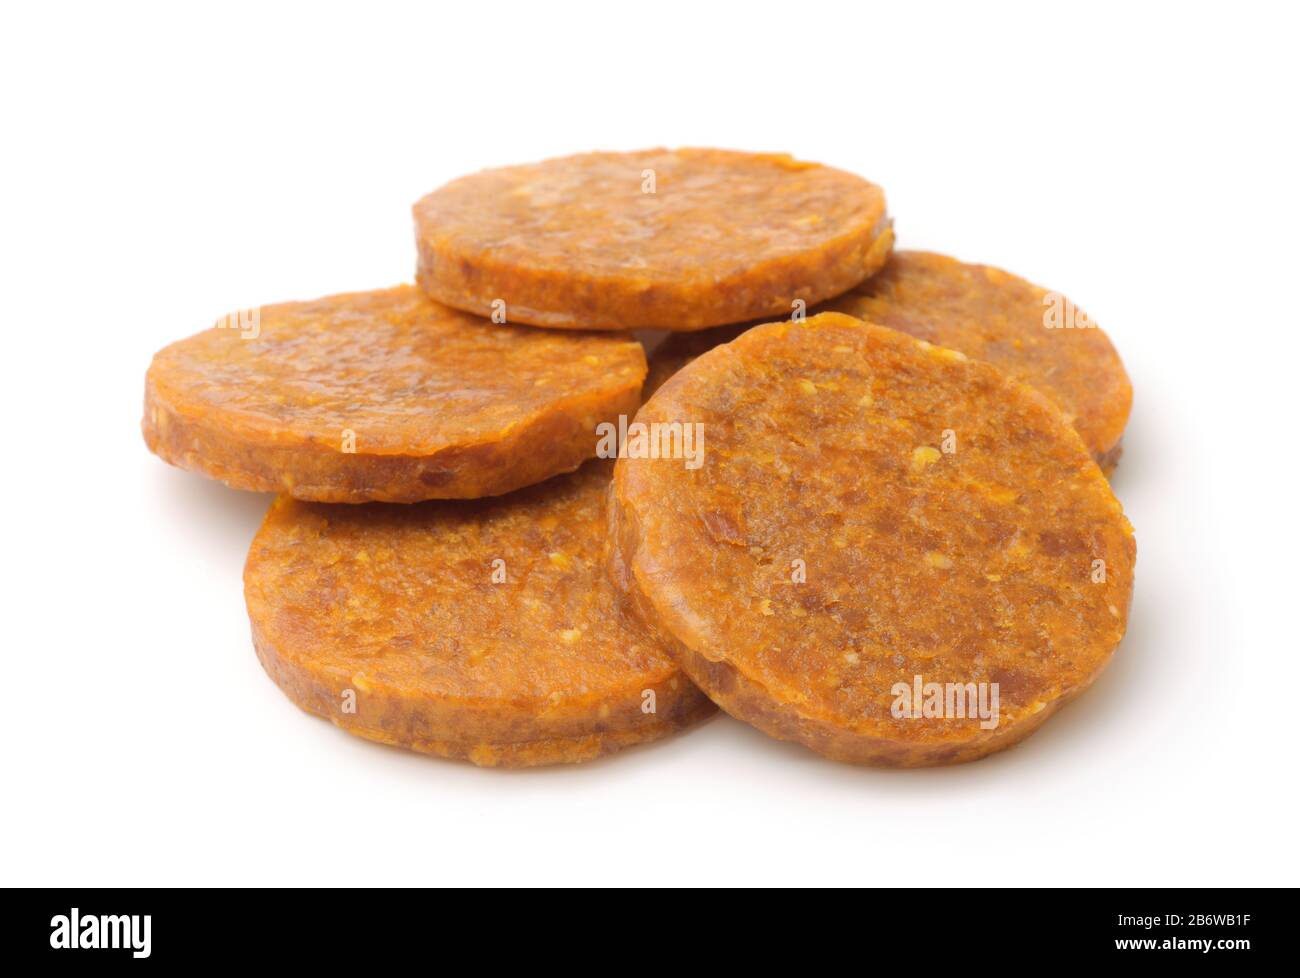 Organic  dried apricot and almond discs dessert solated on white Stock Photo